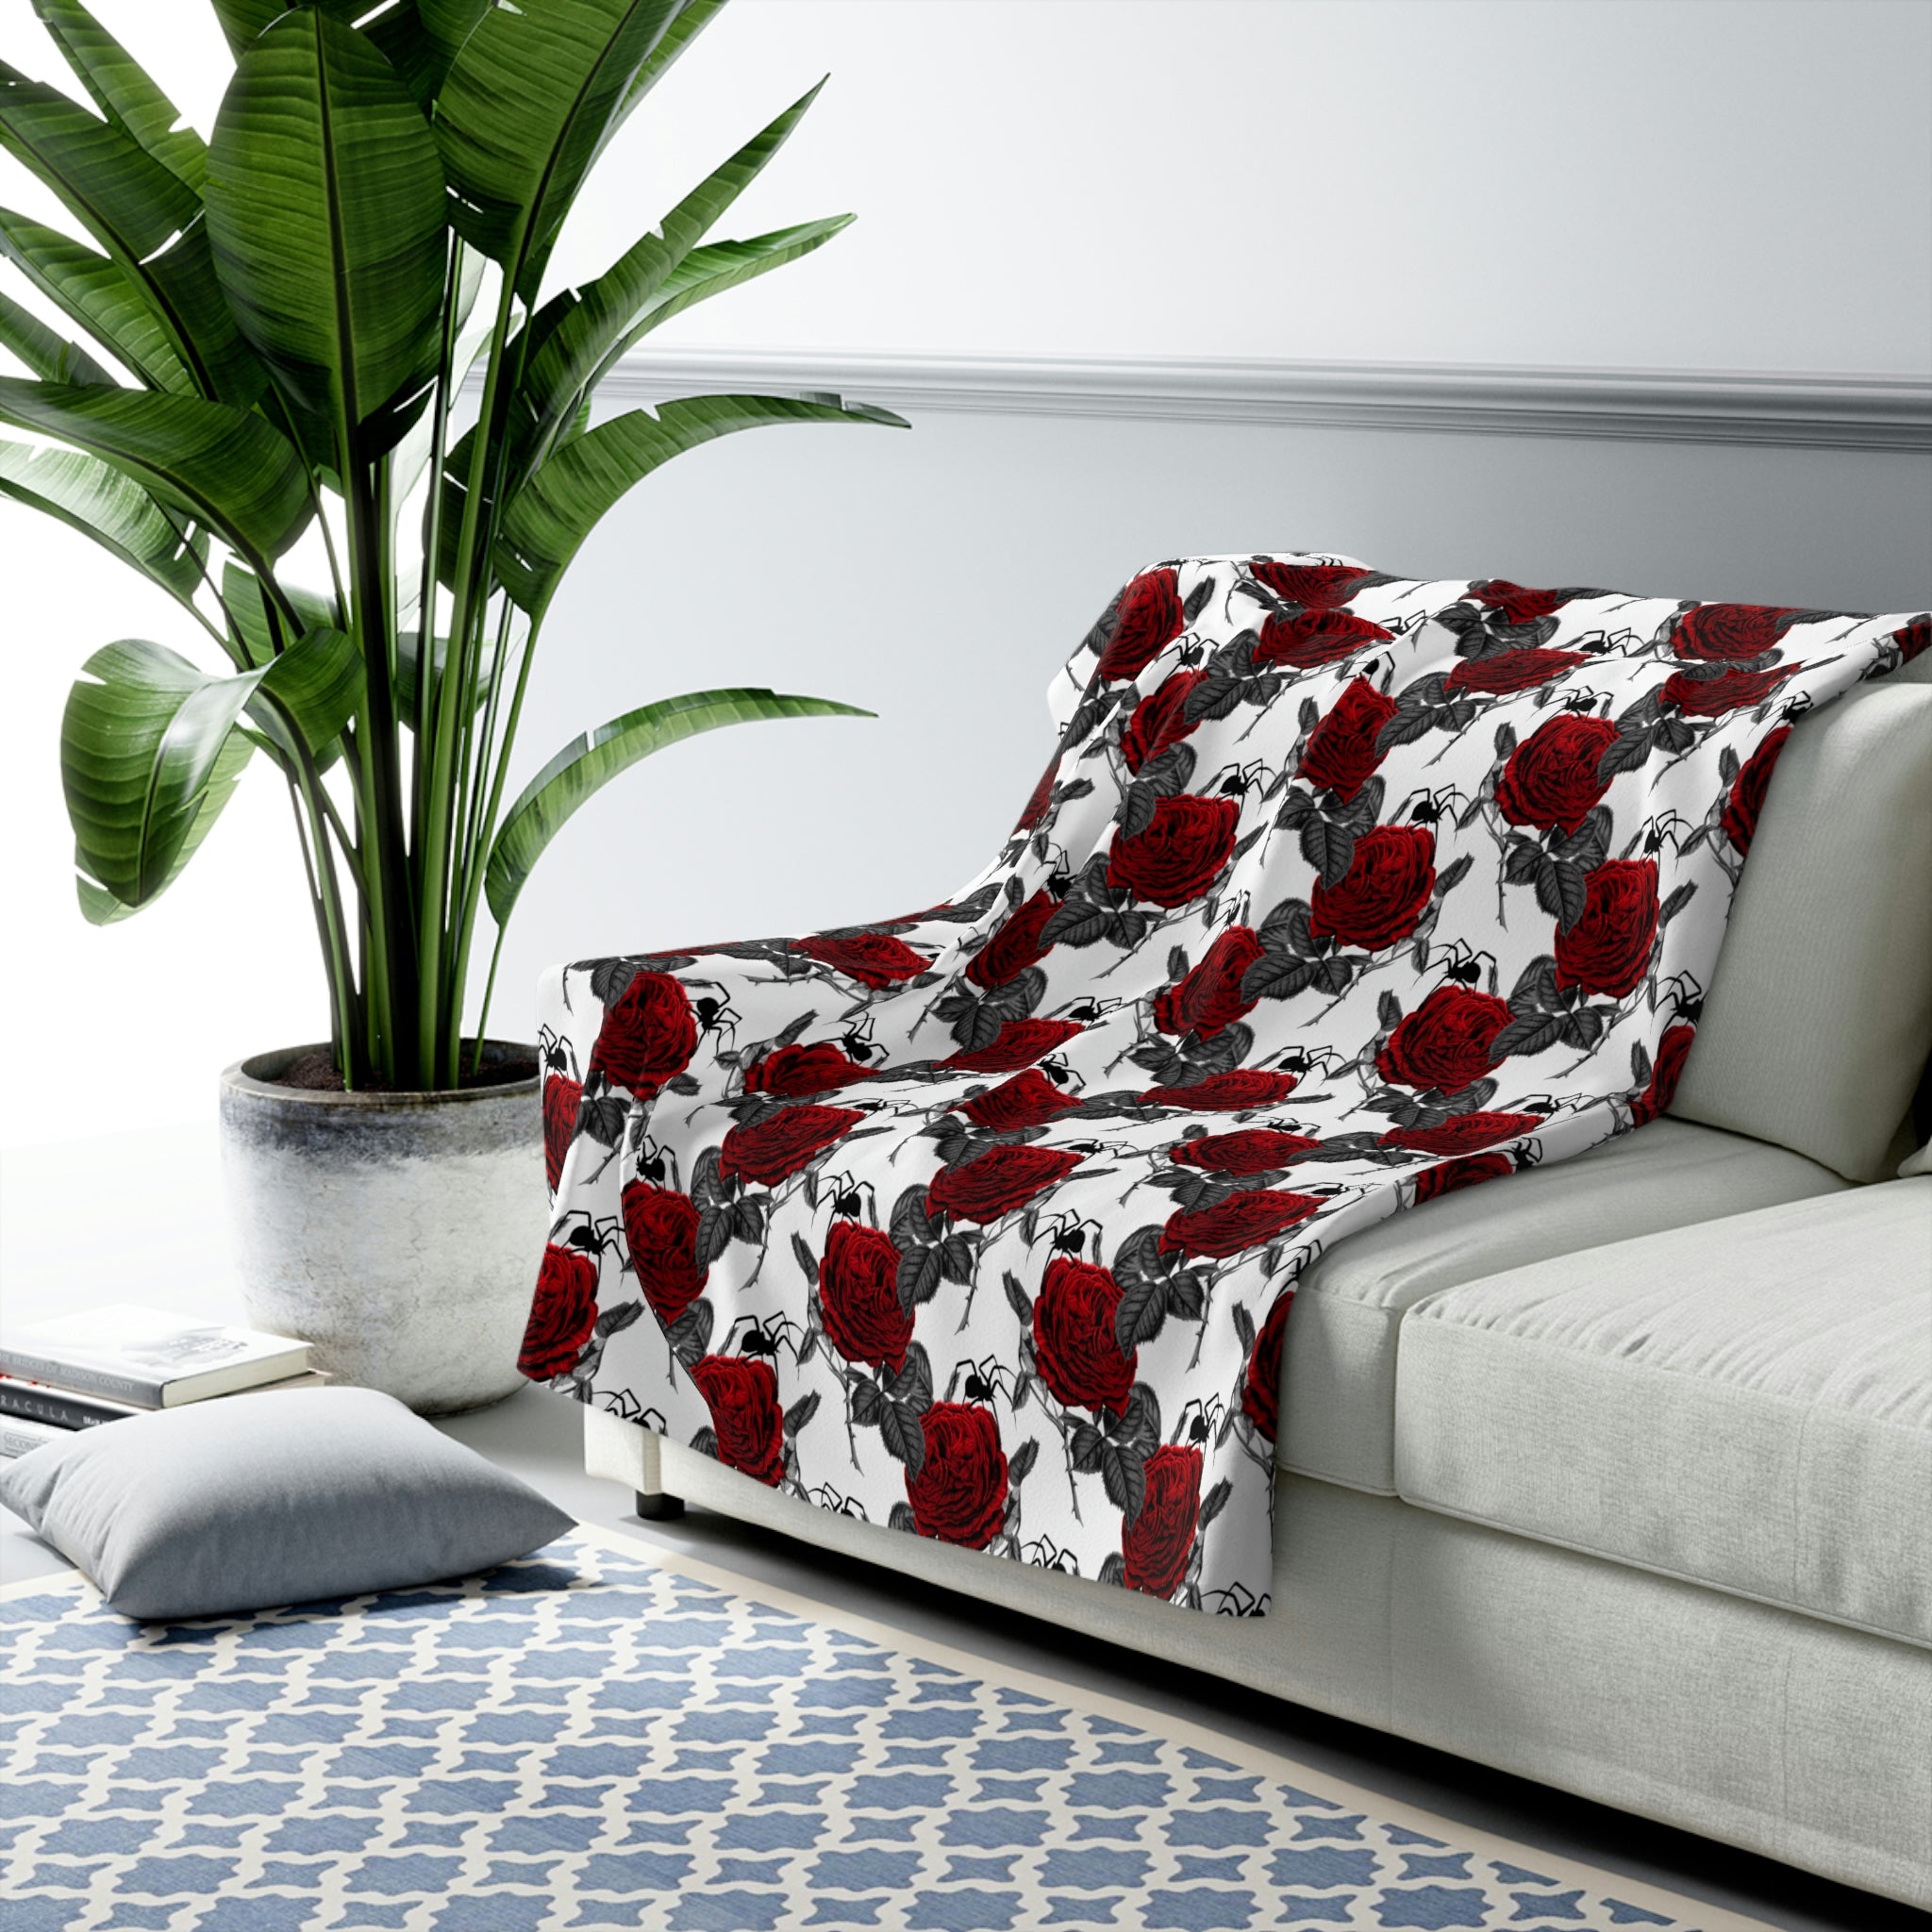 Red Rose Spider Throw Blanket, Minky or Sherpa 50" x 60" - Durazza